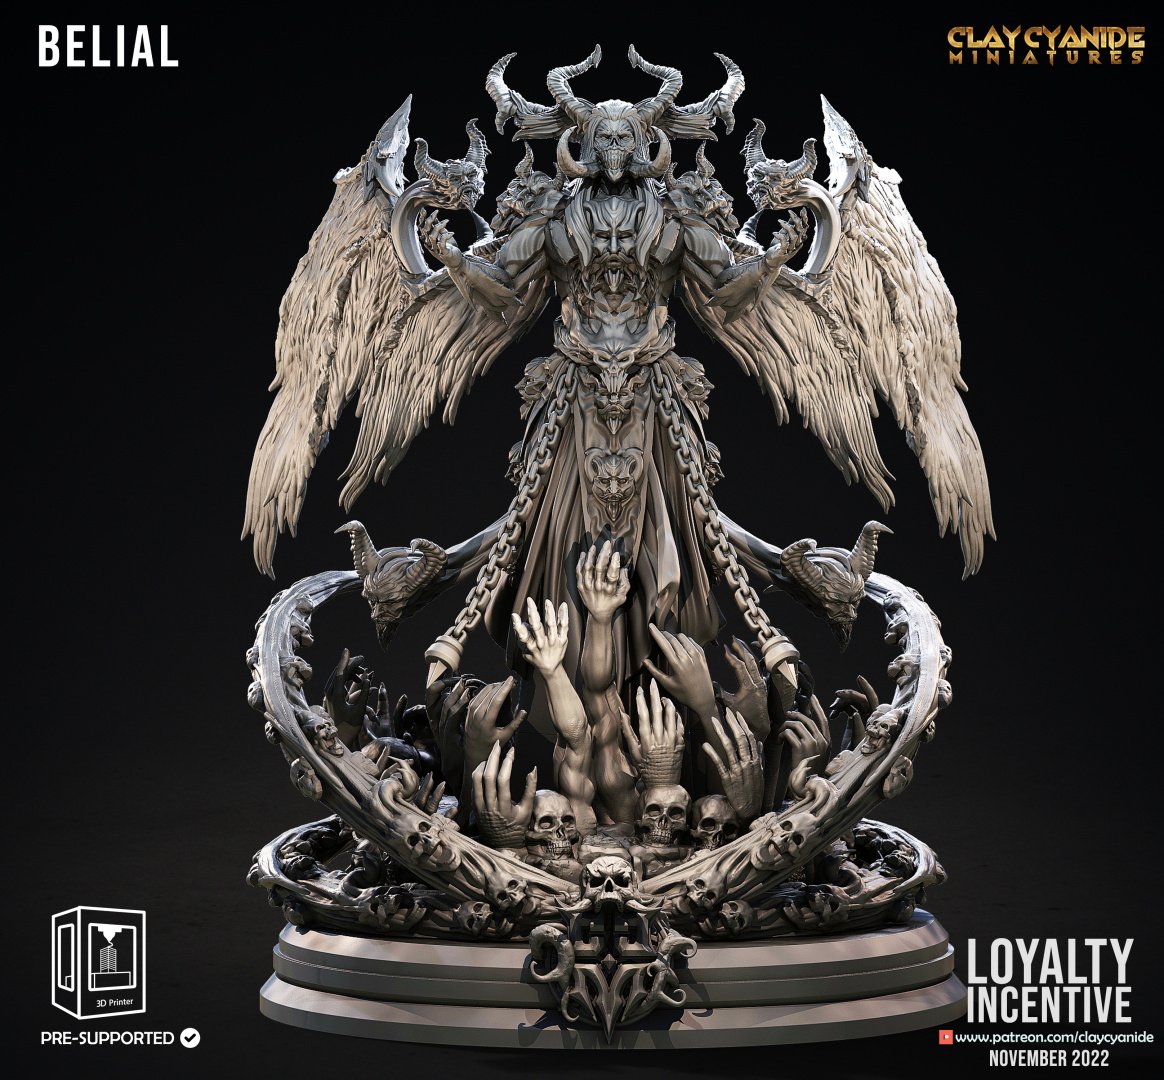 Clay Cyanide Miniatures November 2022 (Loyalty Incentive) Clay Cyanide  MINISTL